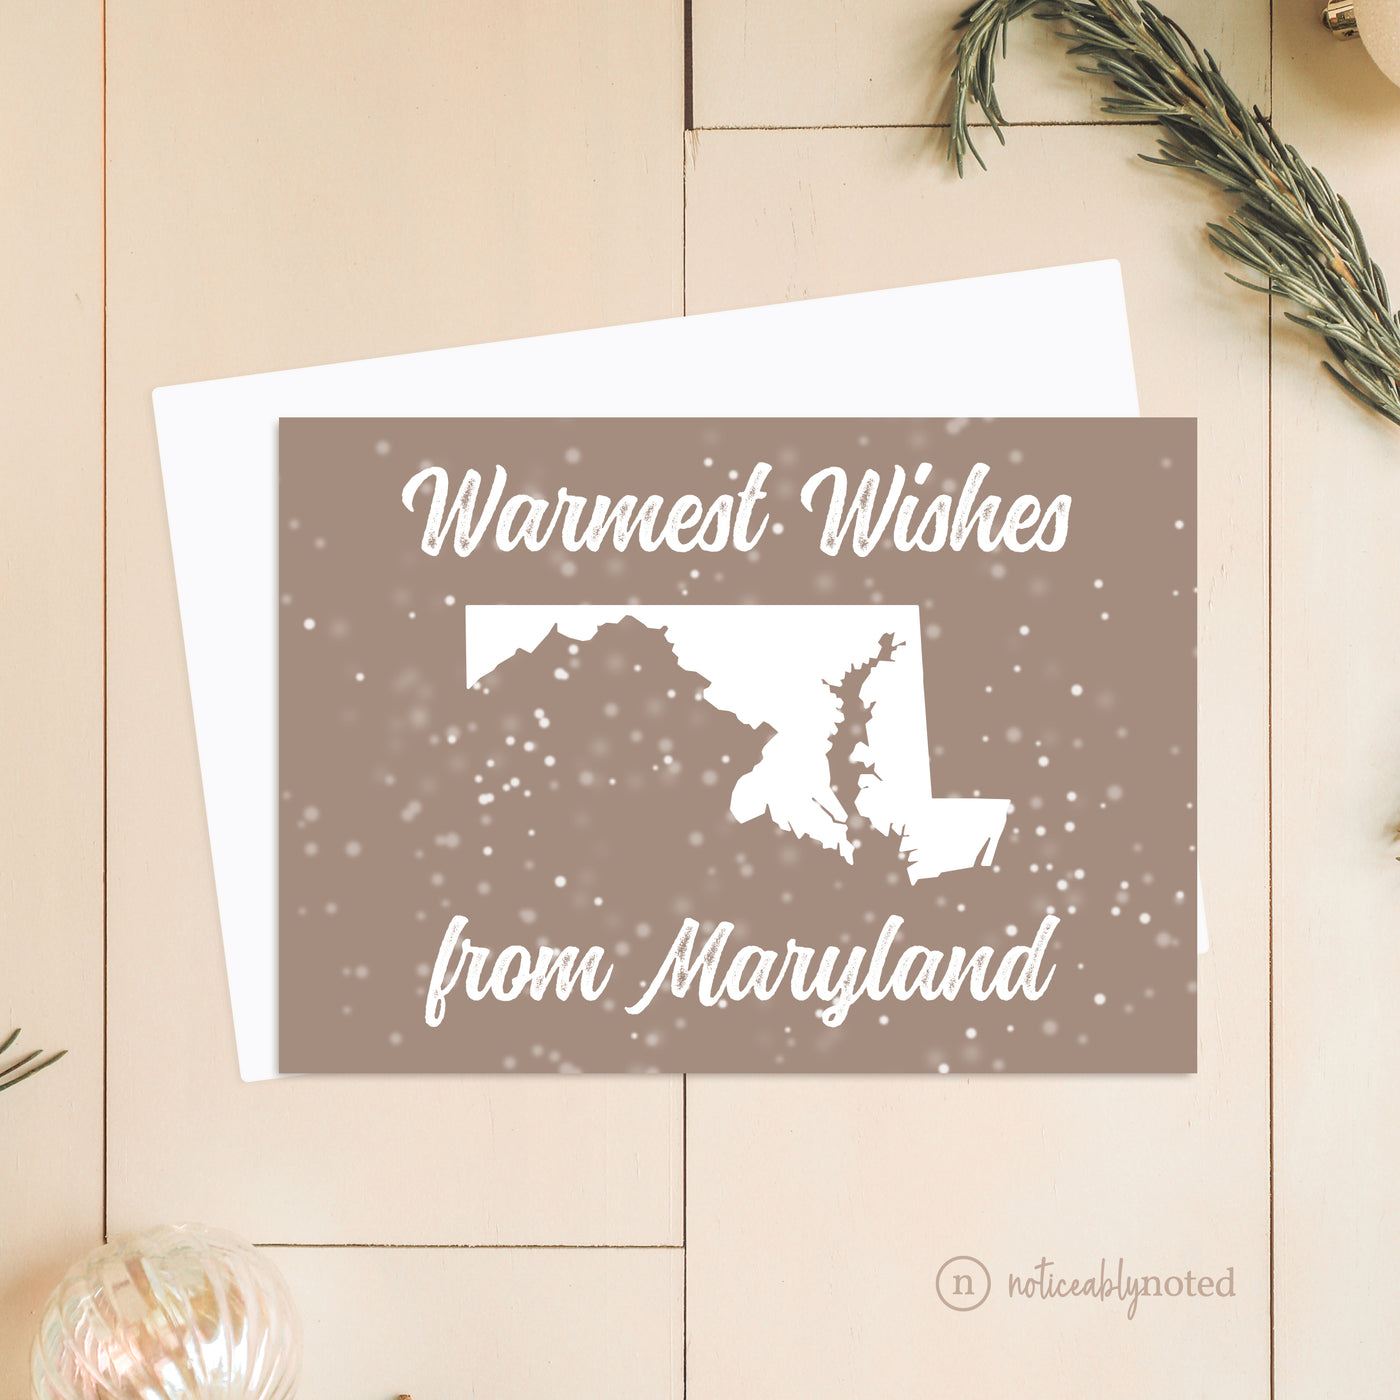 MD Christmas Card | Noticeably Noted